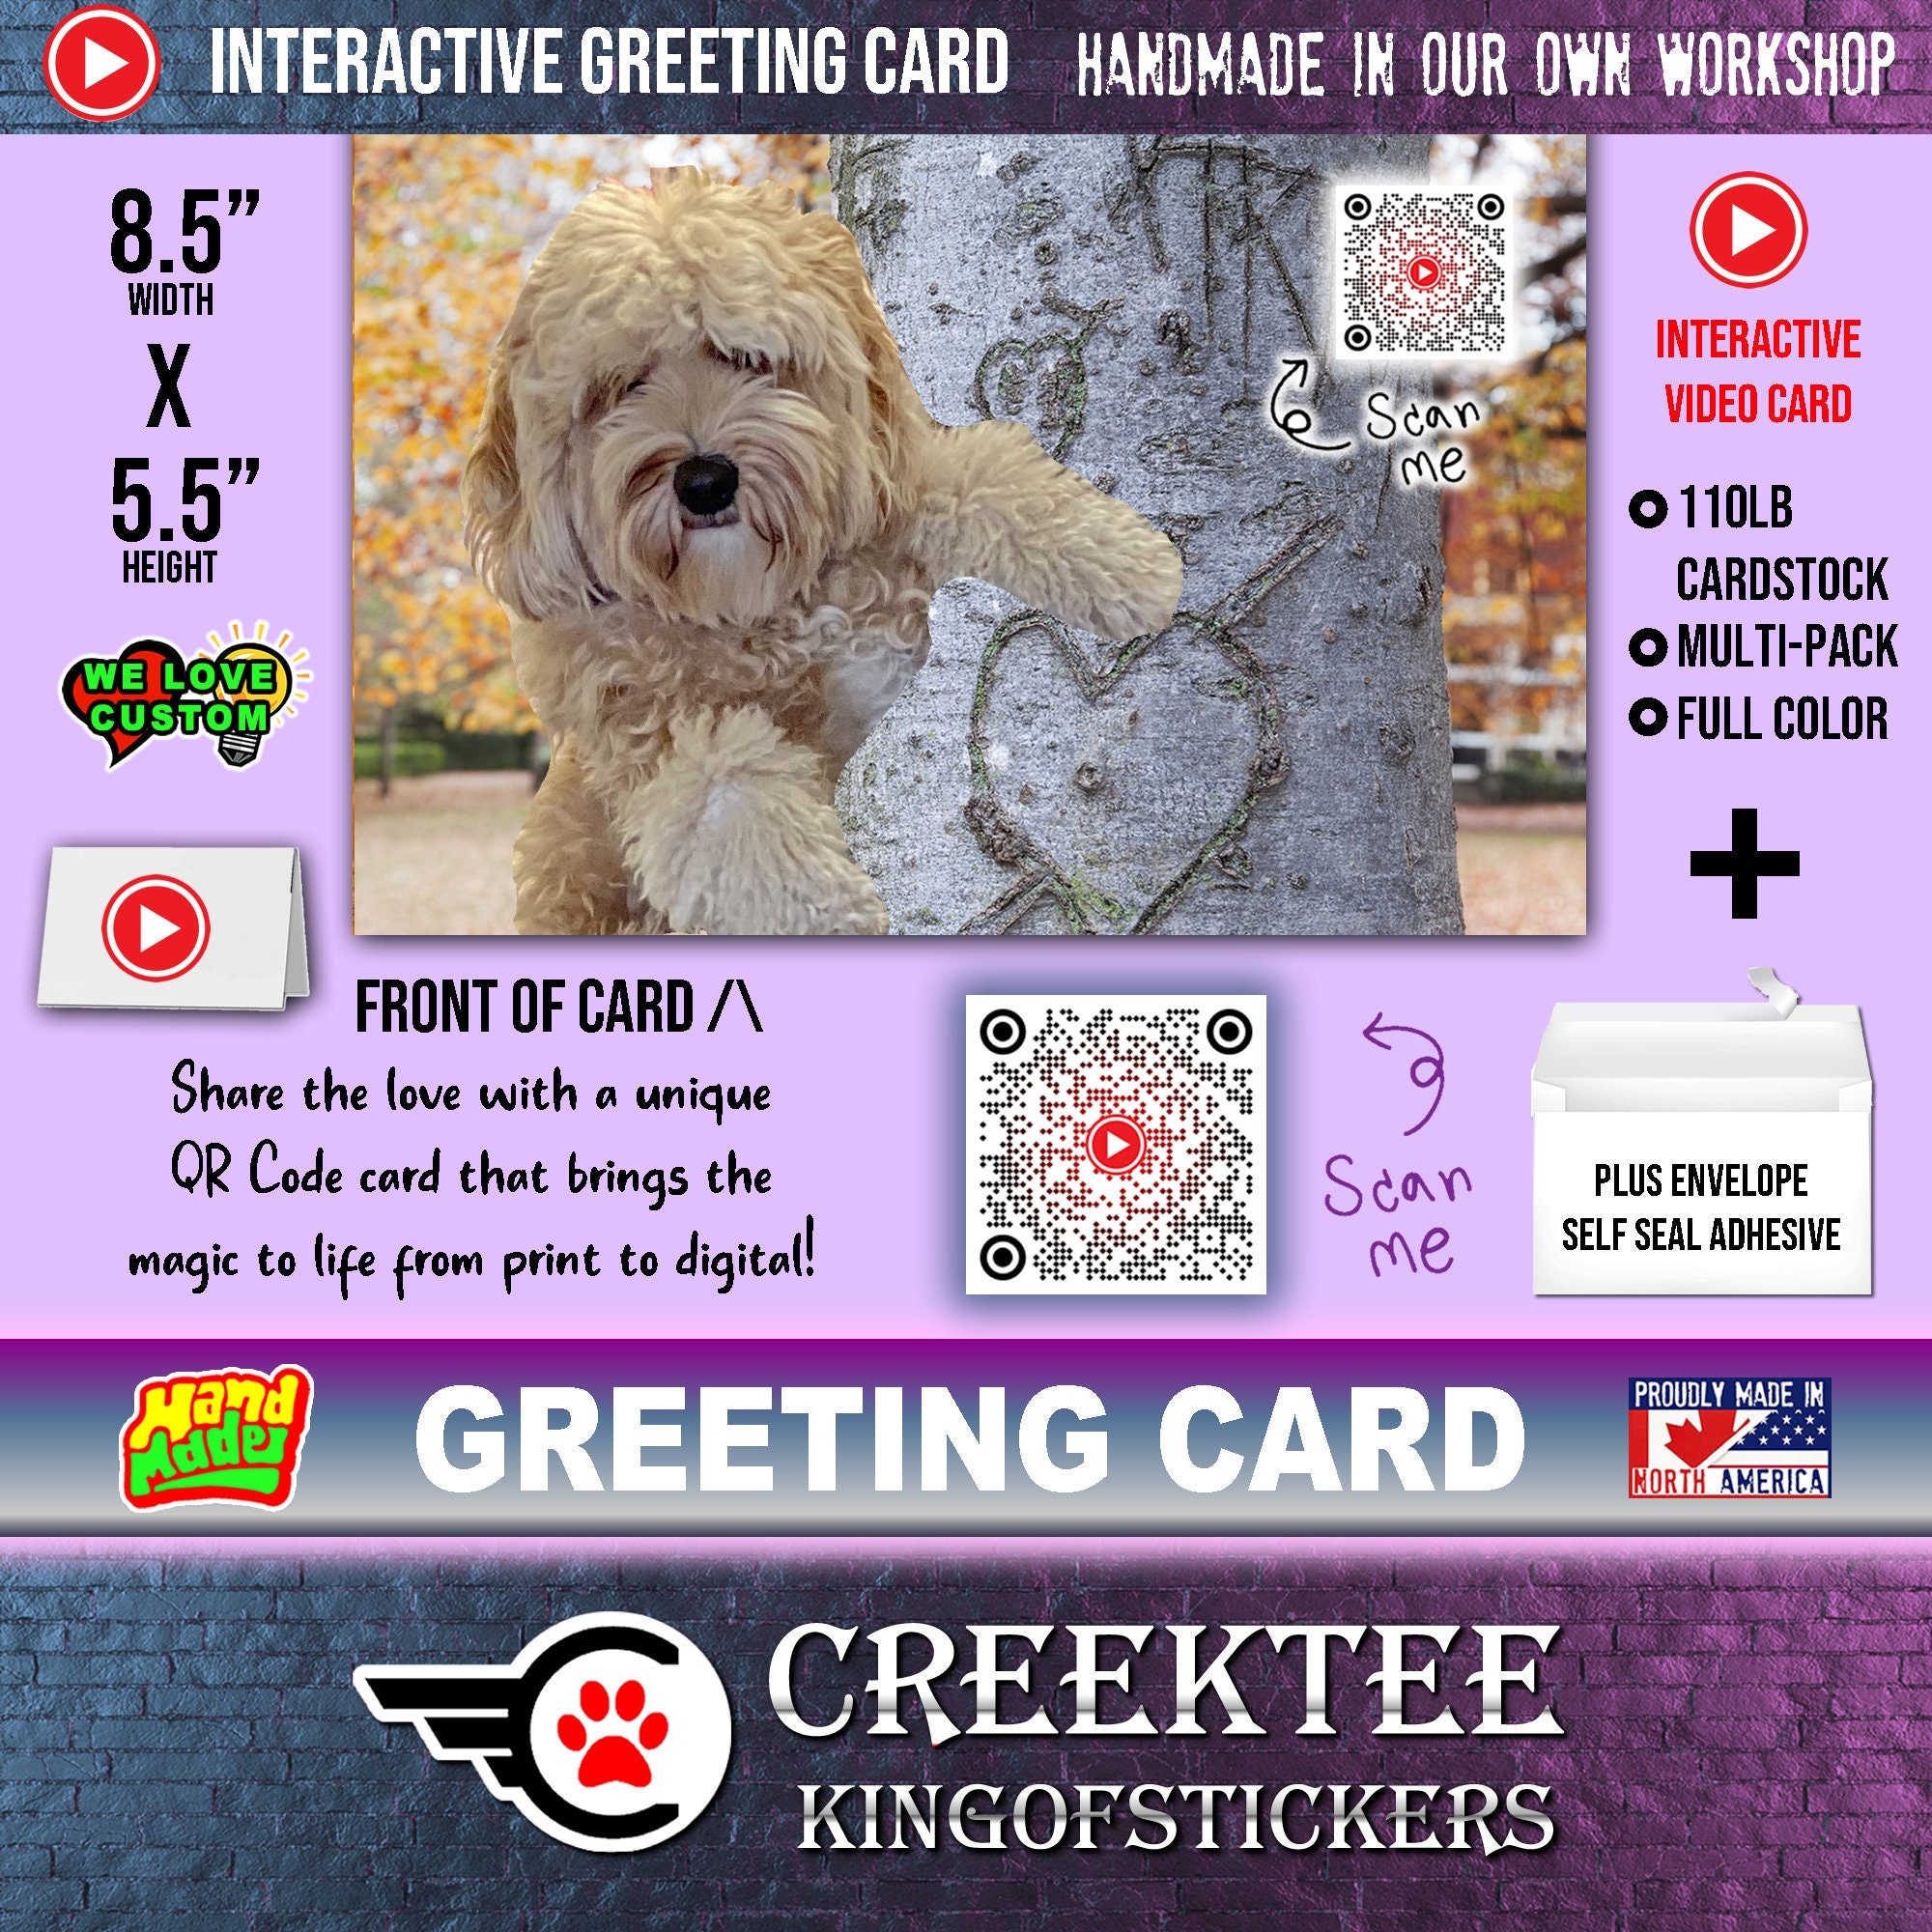 QR Code Video Love Greeting Cards Come To Life. 5.5 inch high x 8.5 inch wide 110lb cardstock hand made full color print. Customizable